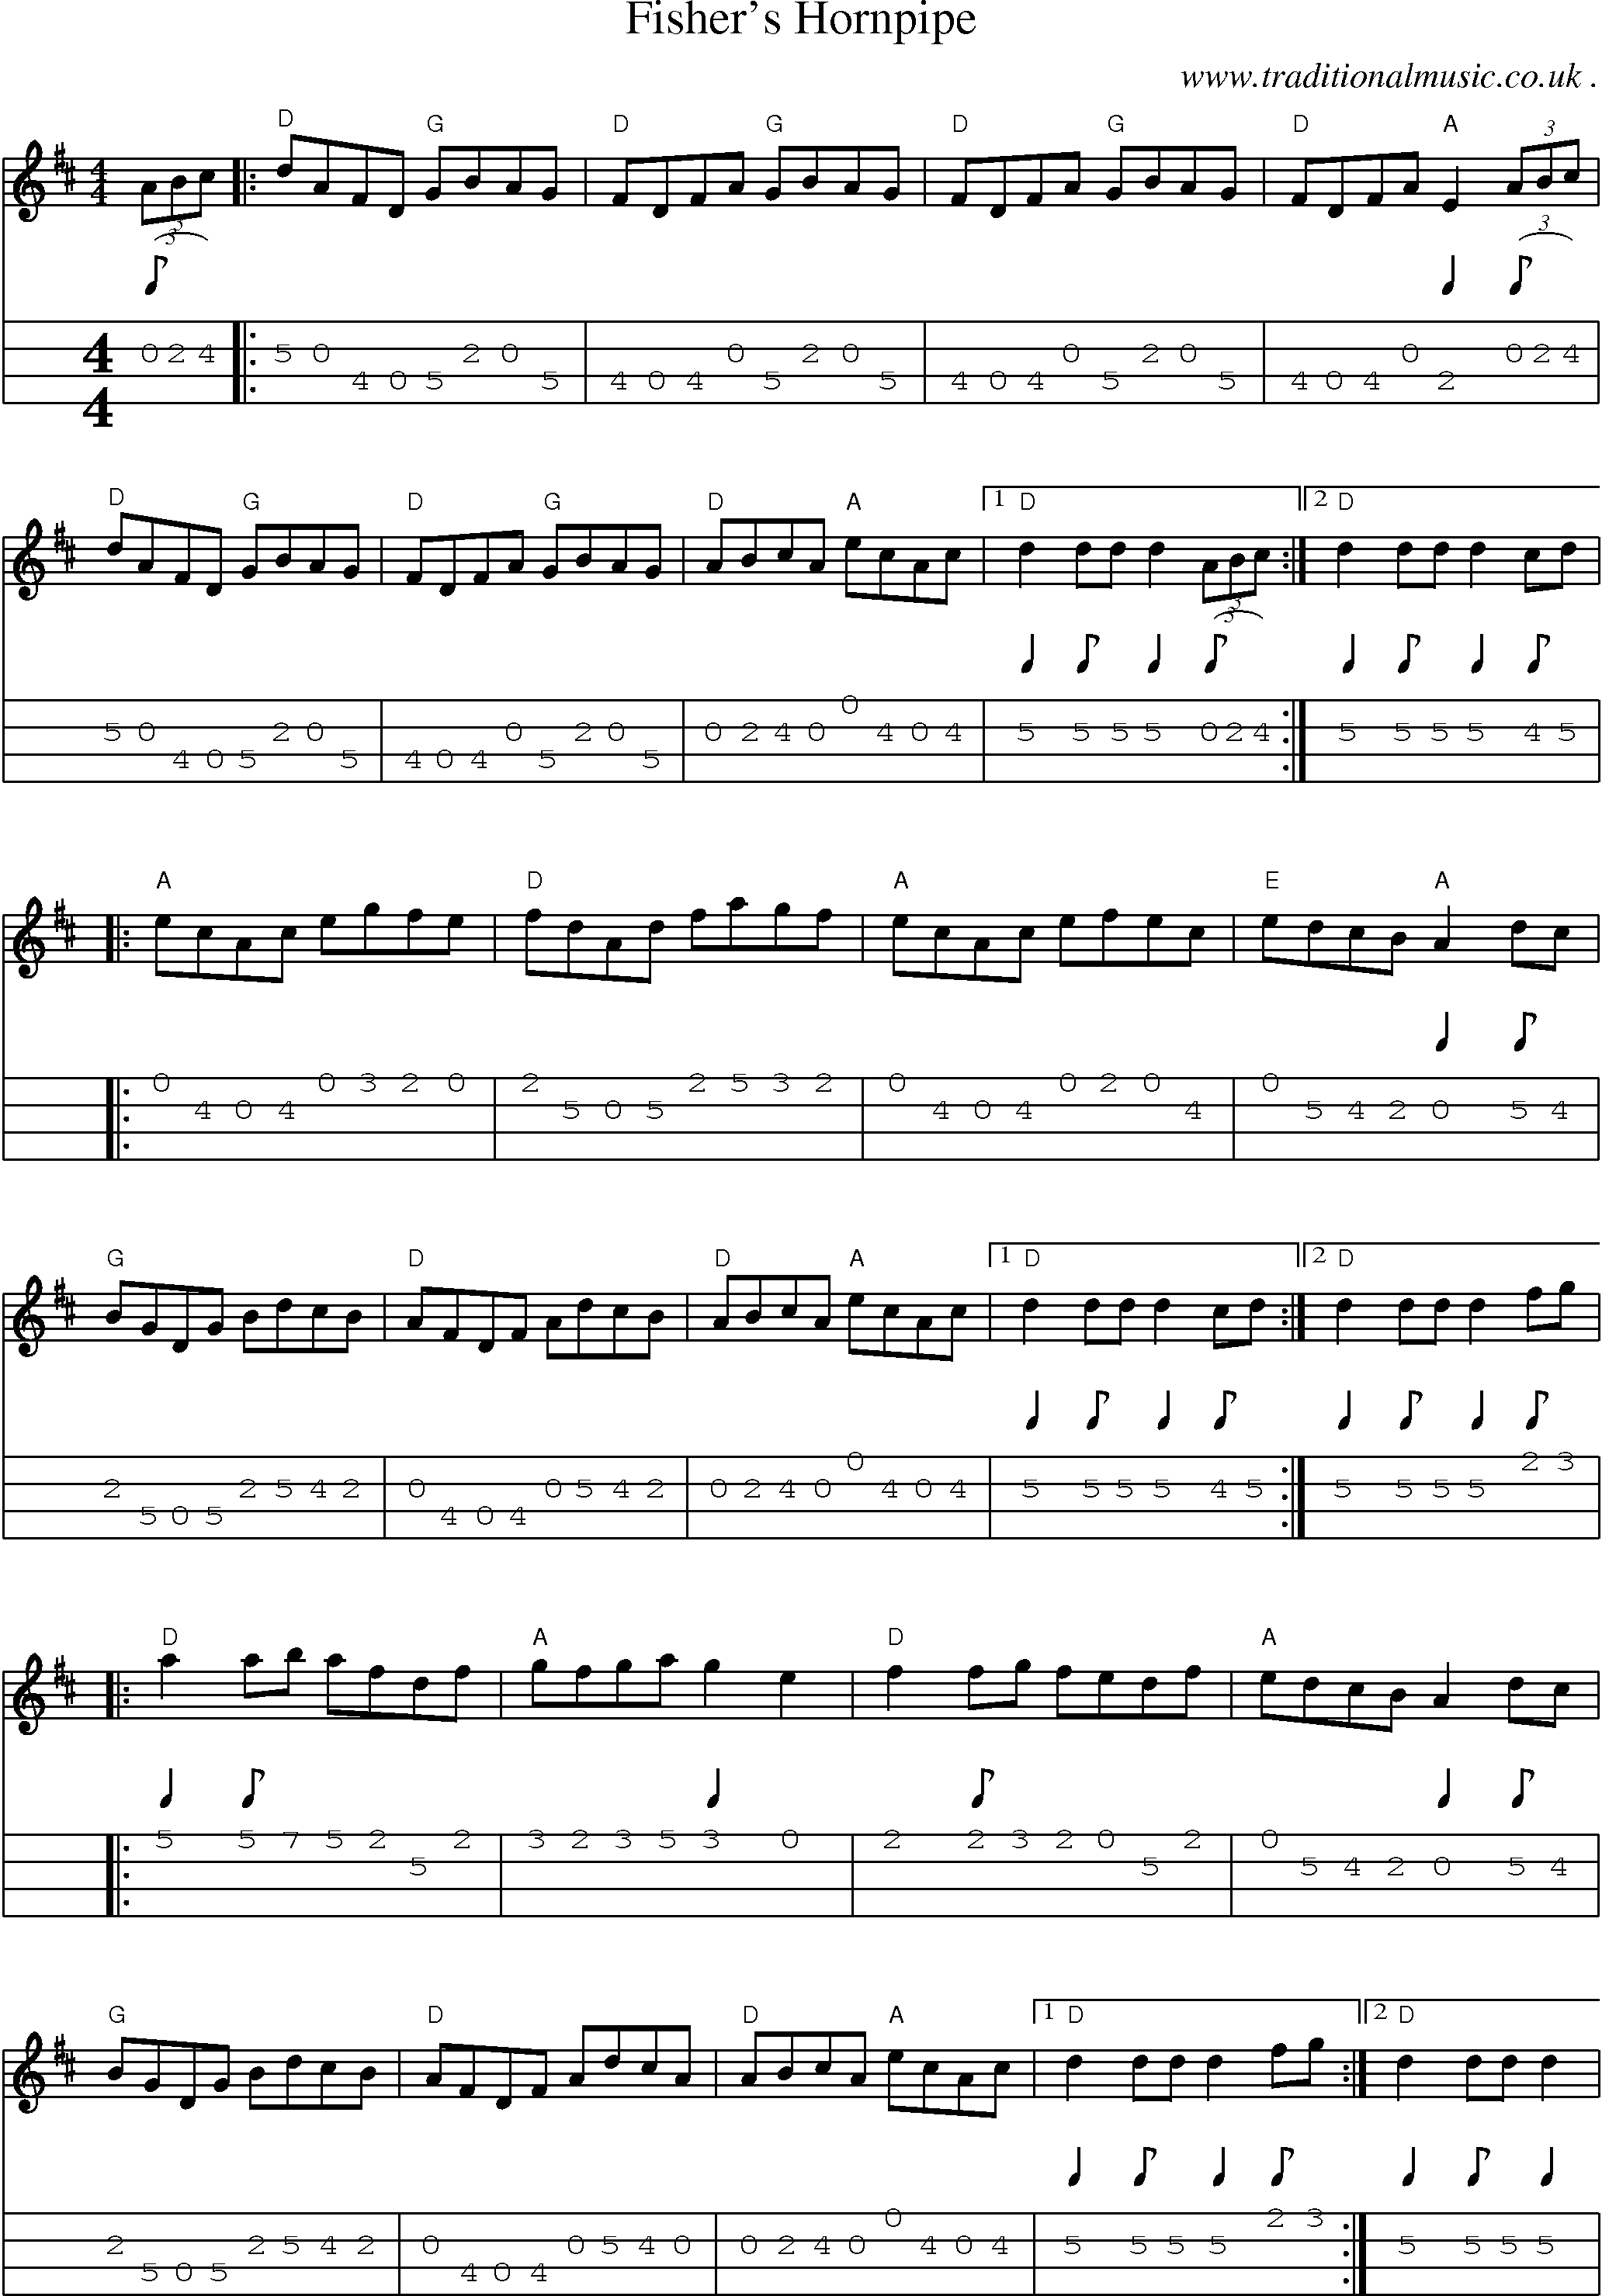 Music Score and Guitar Tabs for Fishers Hornpipe3